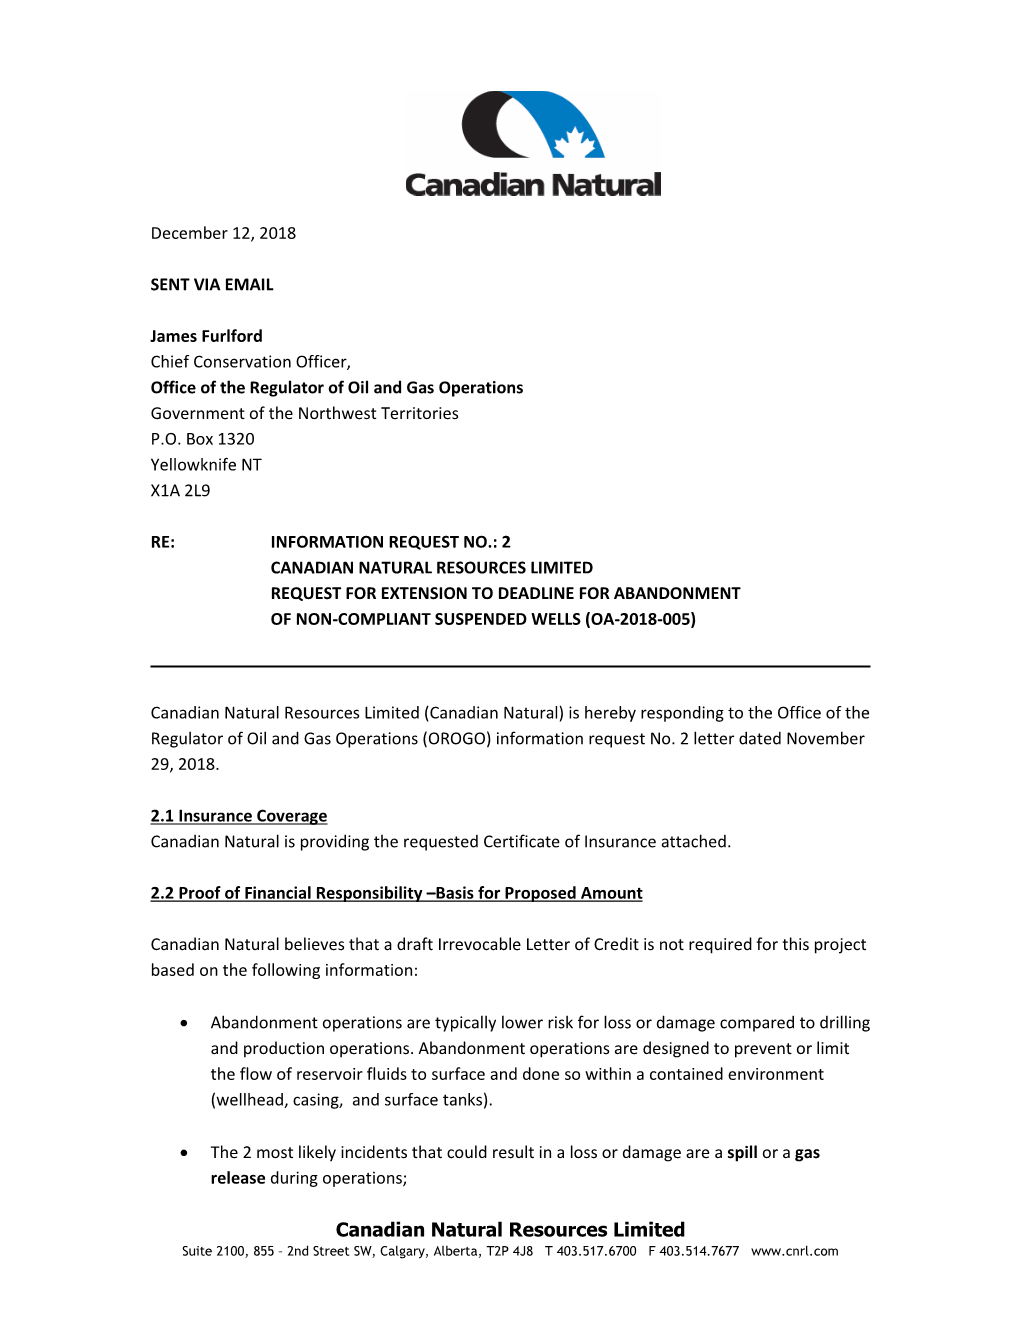 Canadian Natural Resources Limited Request for Extension to Deadline for Abandonment of Non-Compliant Suspended Wells (Oa-2018-005)